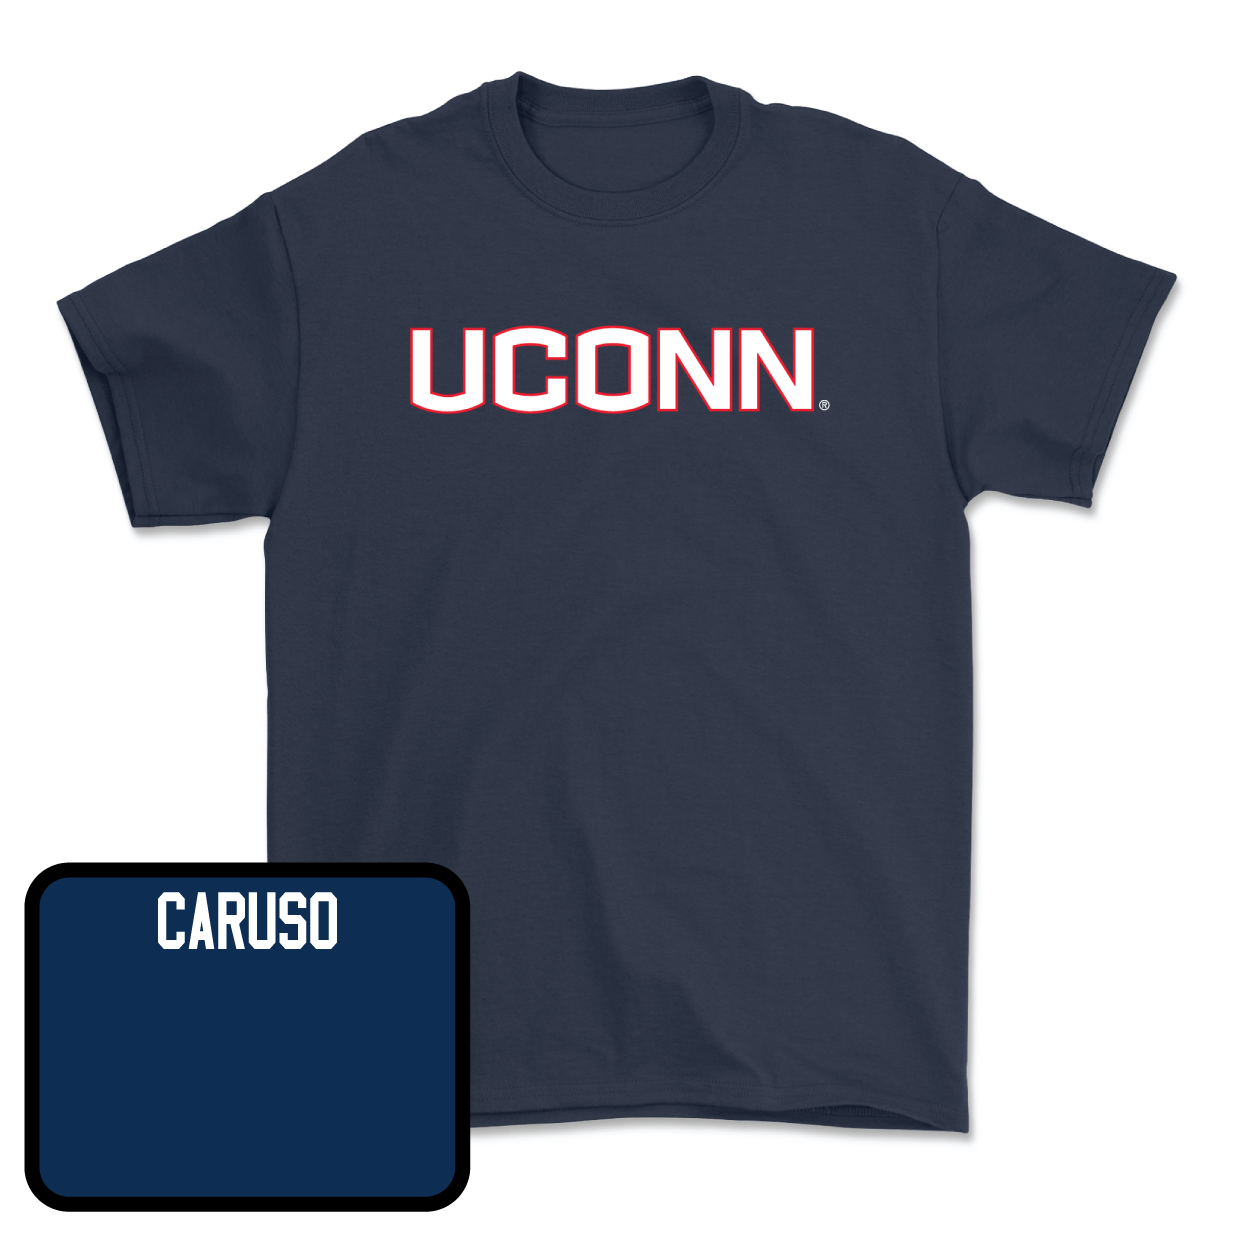 Navy Women's Rowing UConn Tee Large / Riley Caruso